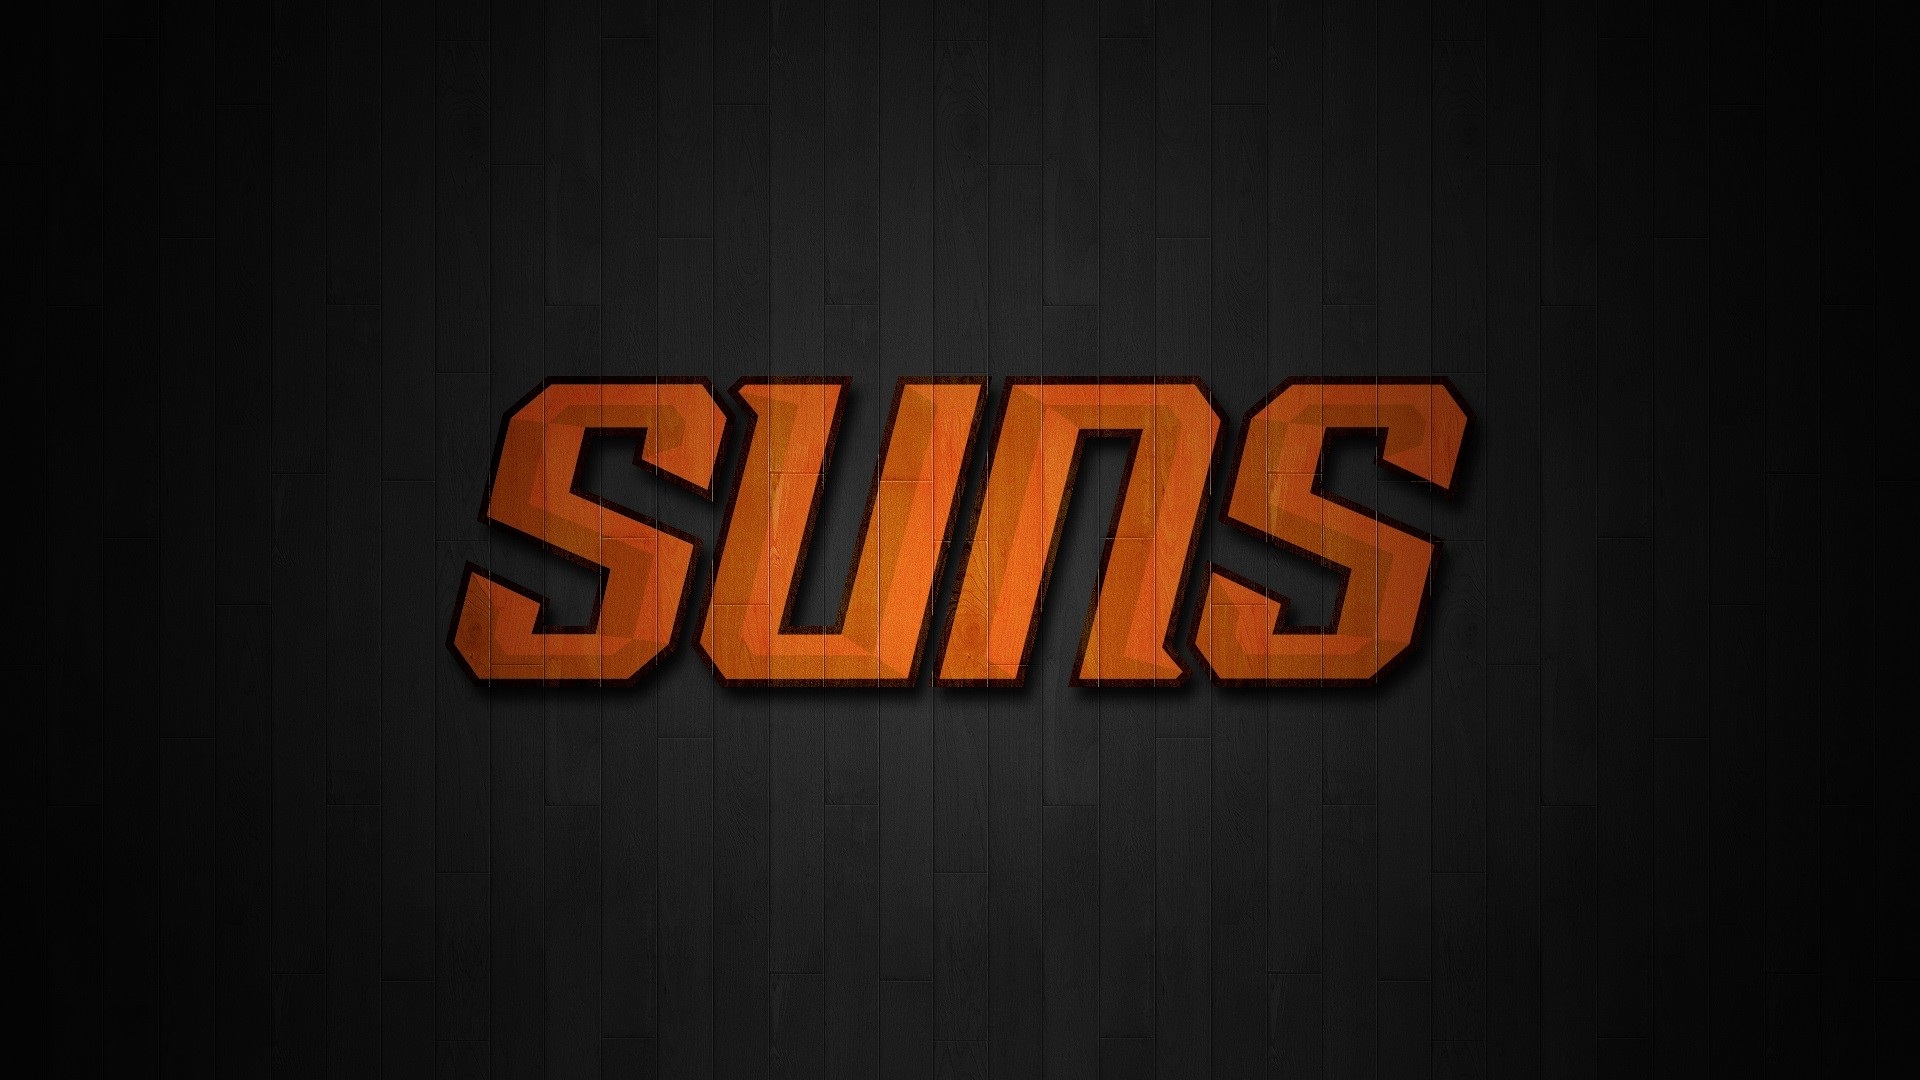 Wallpaper Desktop Phoenix Suns NBA HD with high-resolution 1920x1080 pixel. You can use this wallpaper for your Desktop Computer Backgrounds, Windows or Mac Screensavers, iPhone Lock screen, Tablet or Android and another Mobile Phone device